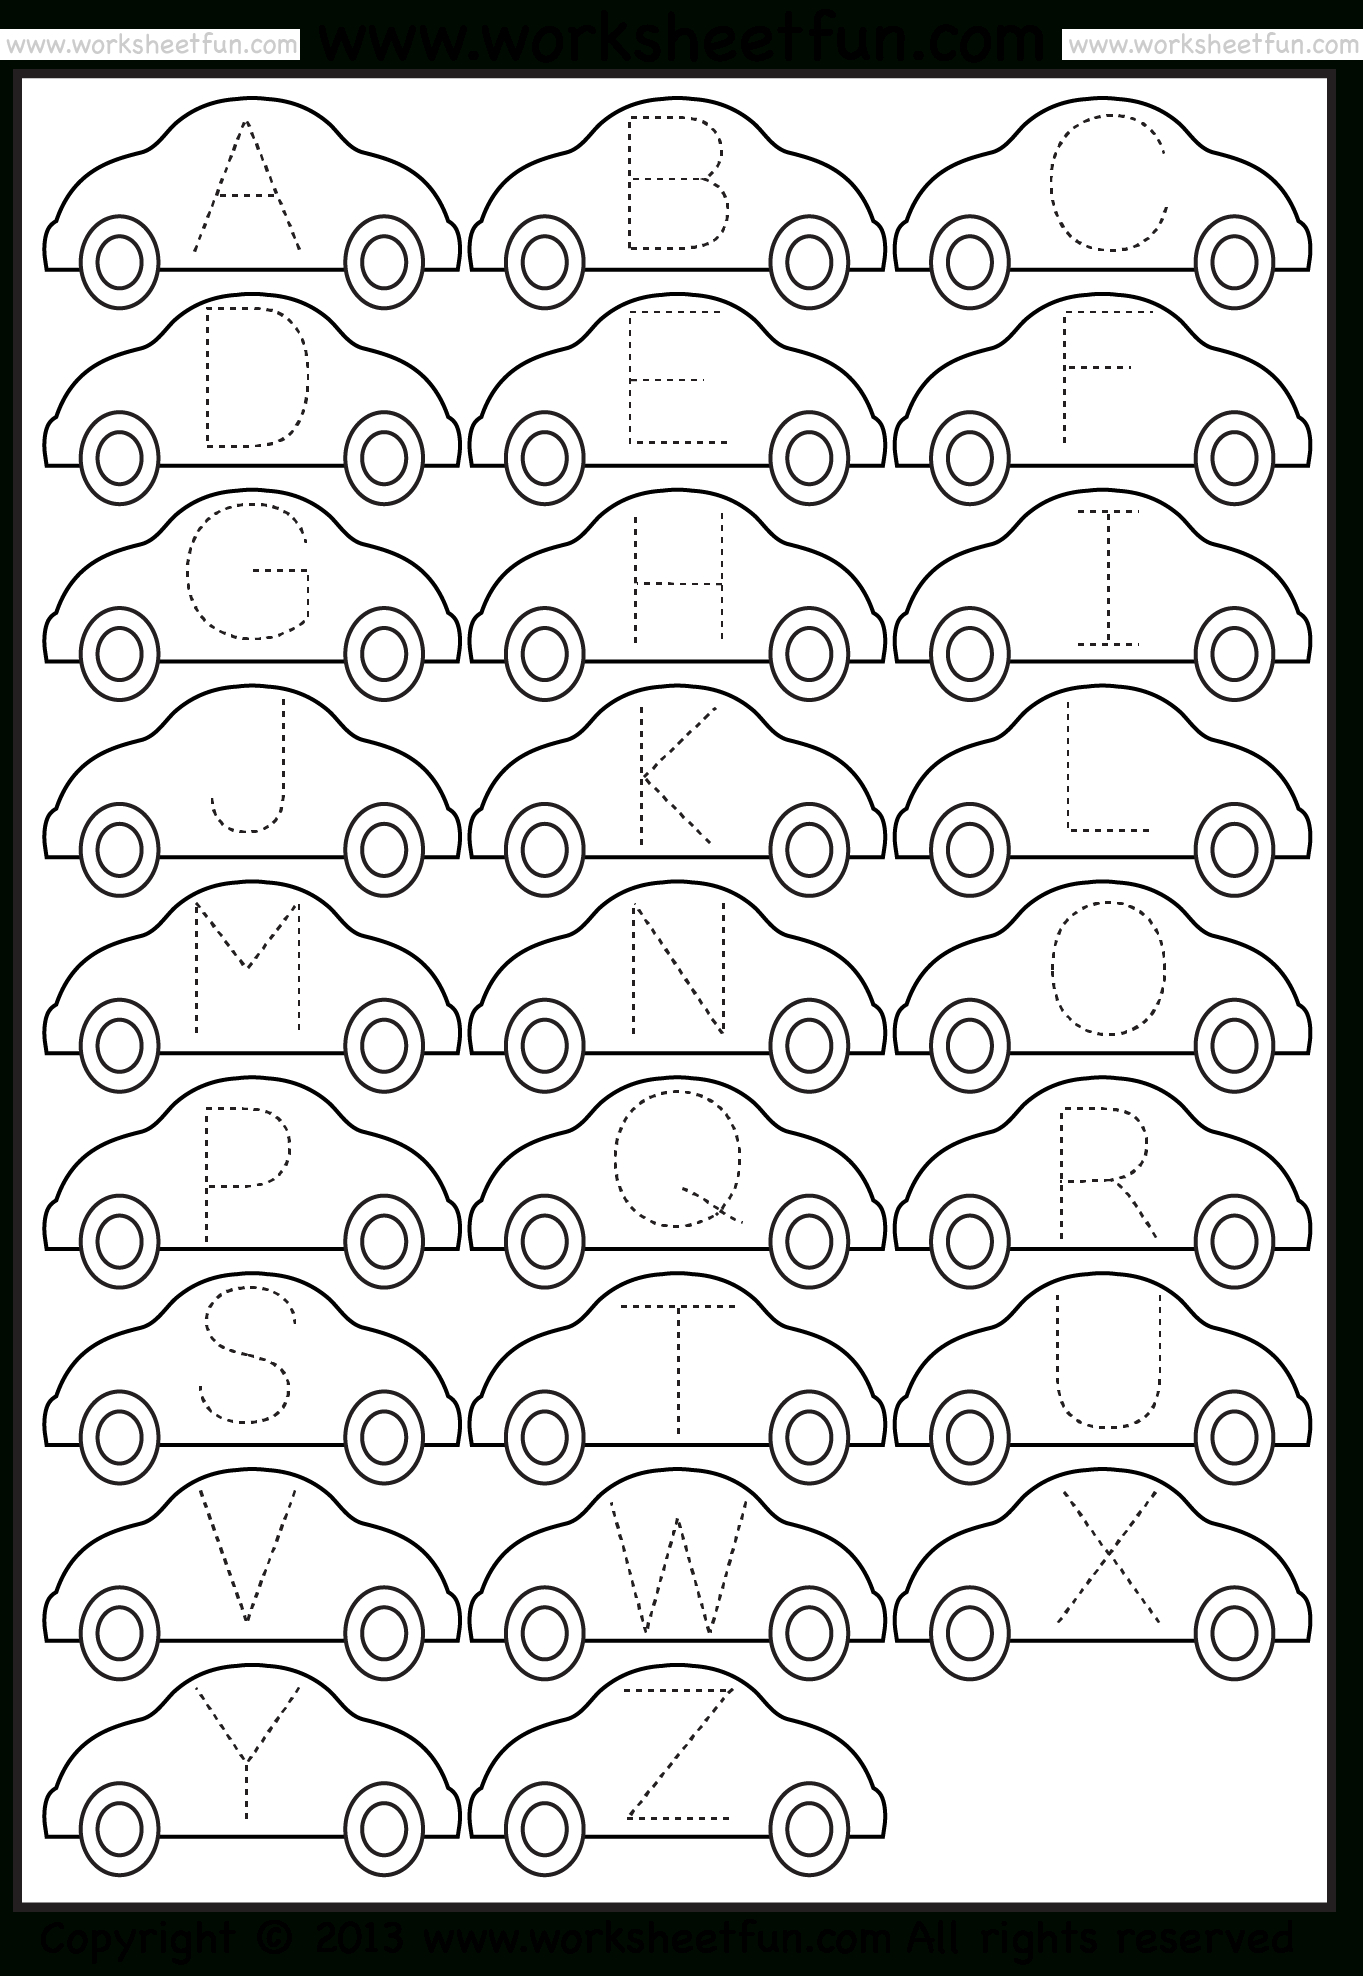 Tracing – Letter Tracing  Free Printable Worksheets – Worksheetfun With Letter A Tracing Worksheets Preschool